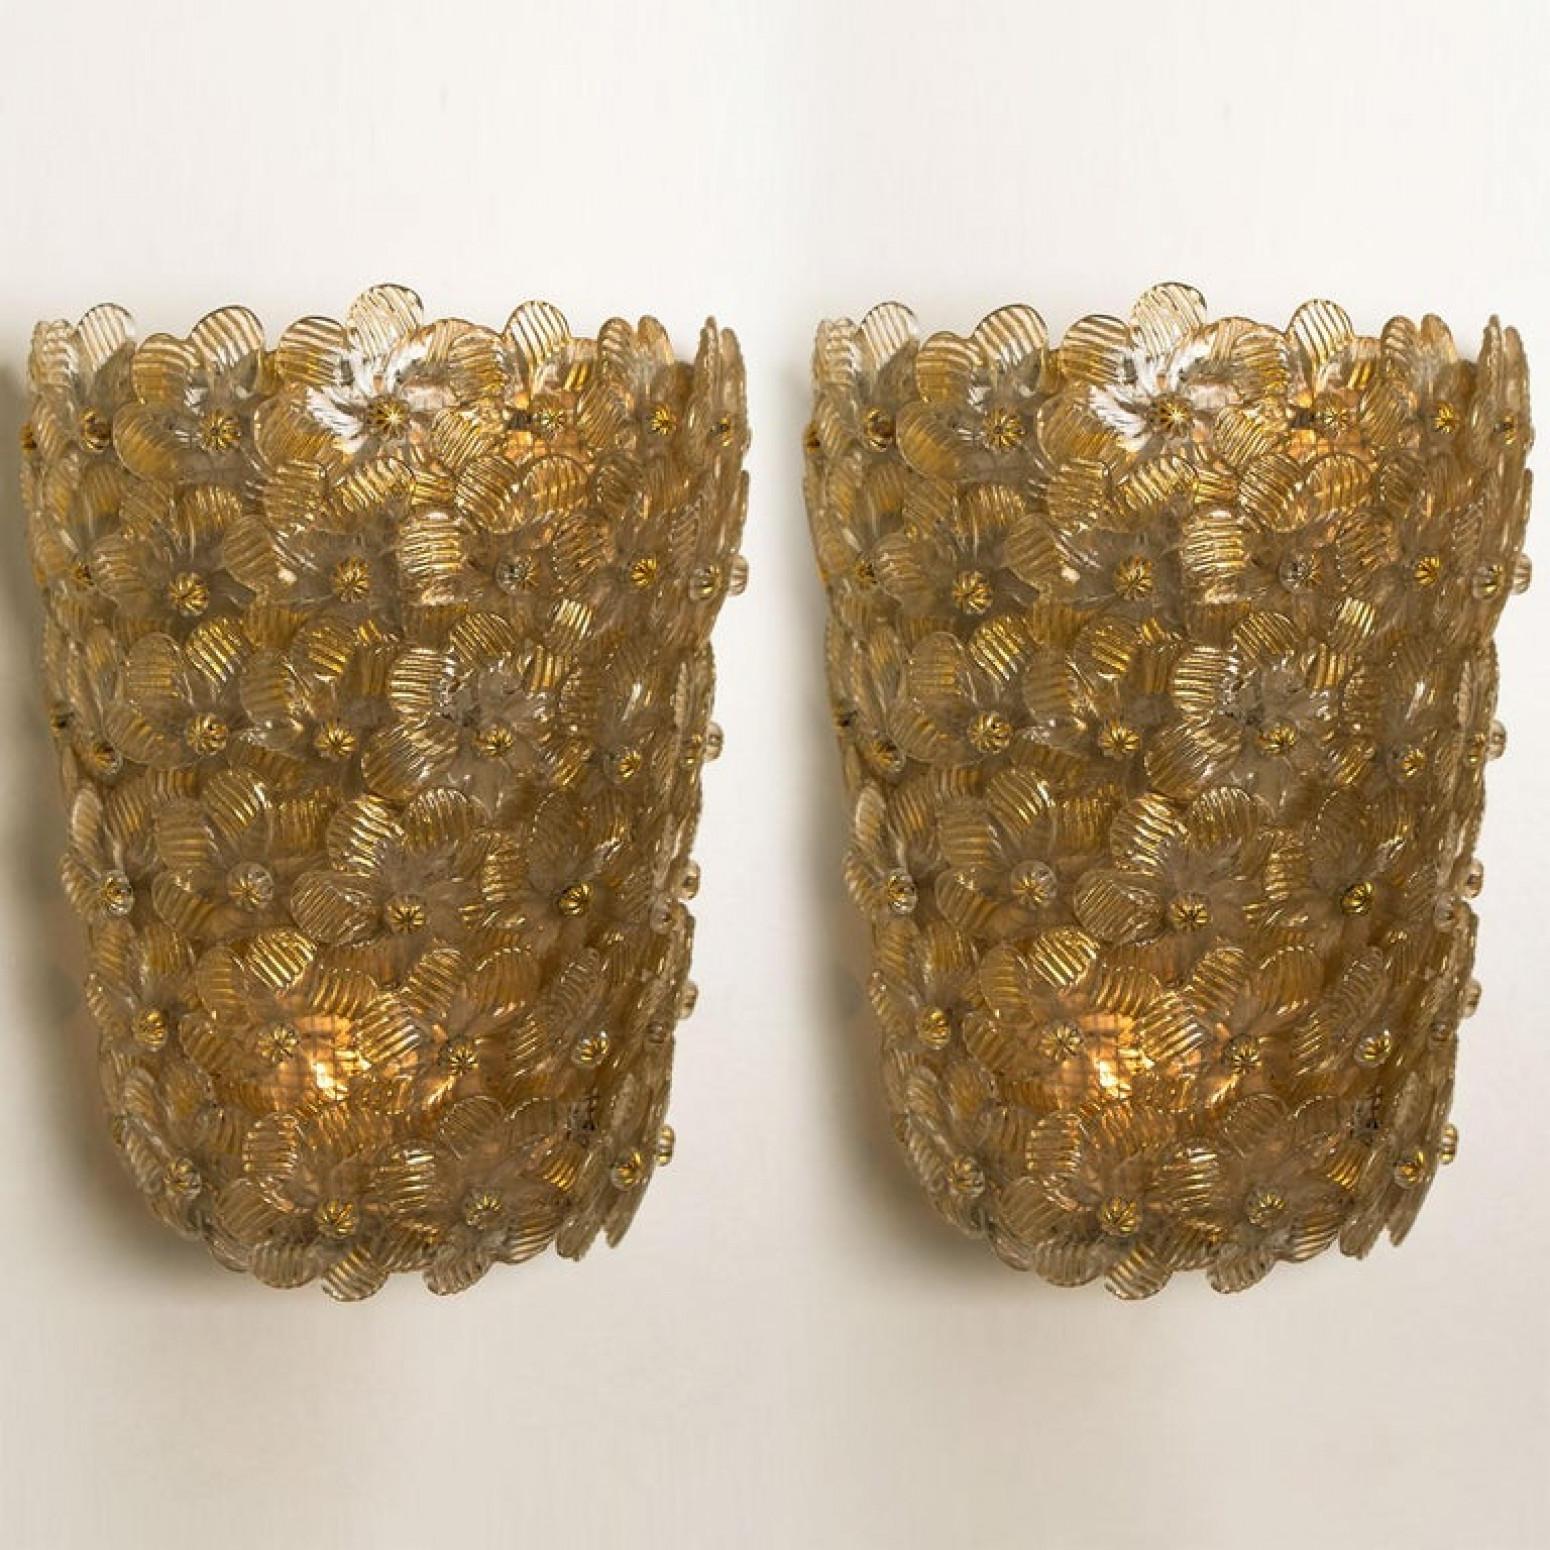 Italian Pair of Flower Light Fixtures by Barovier & Toso, Murano, 1990s For Sale